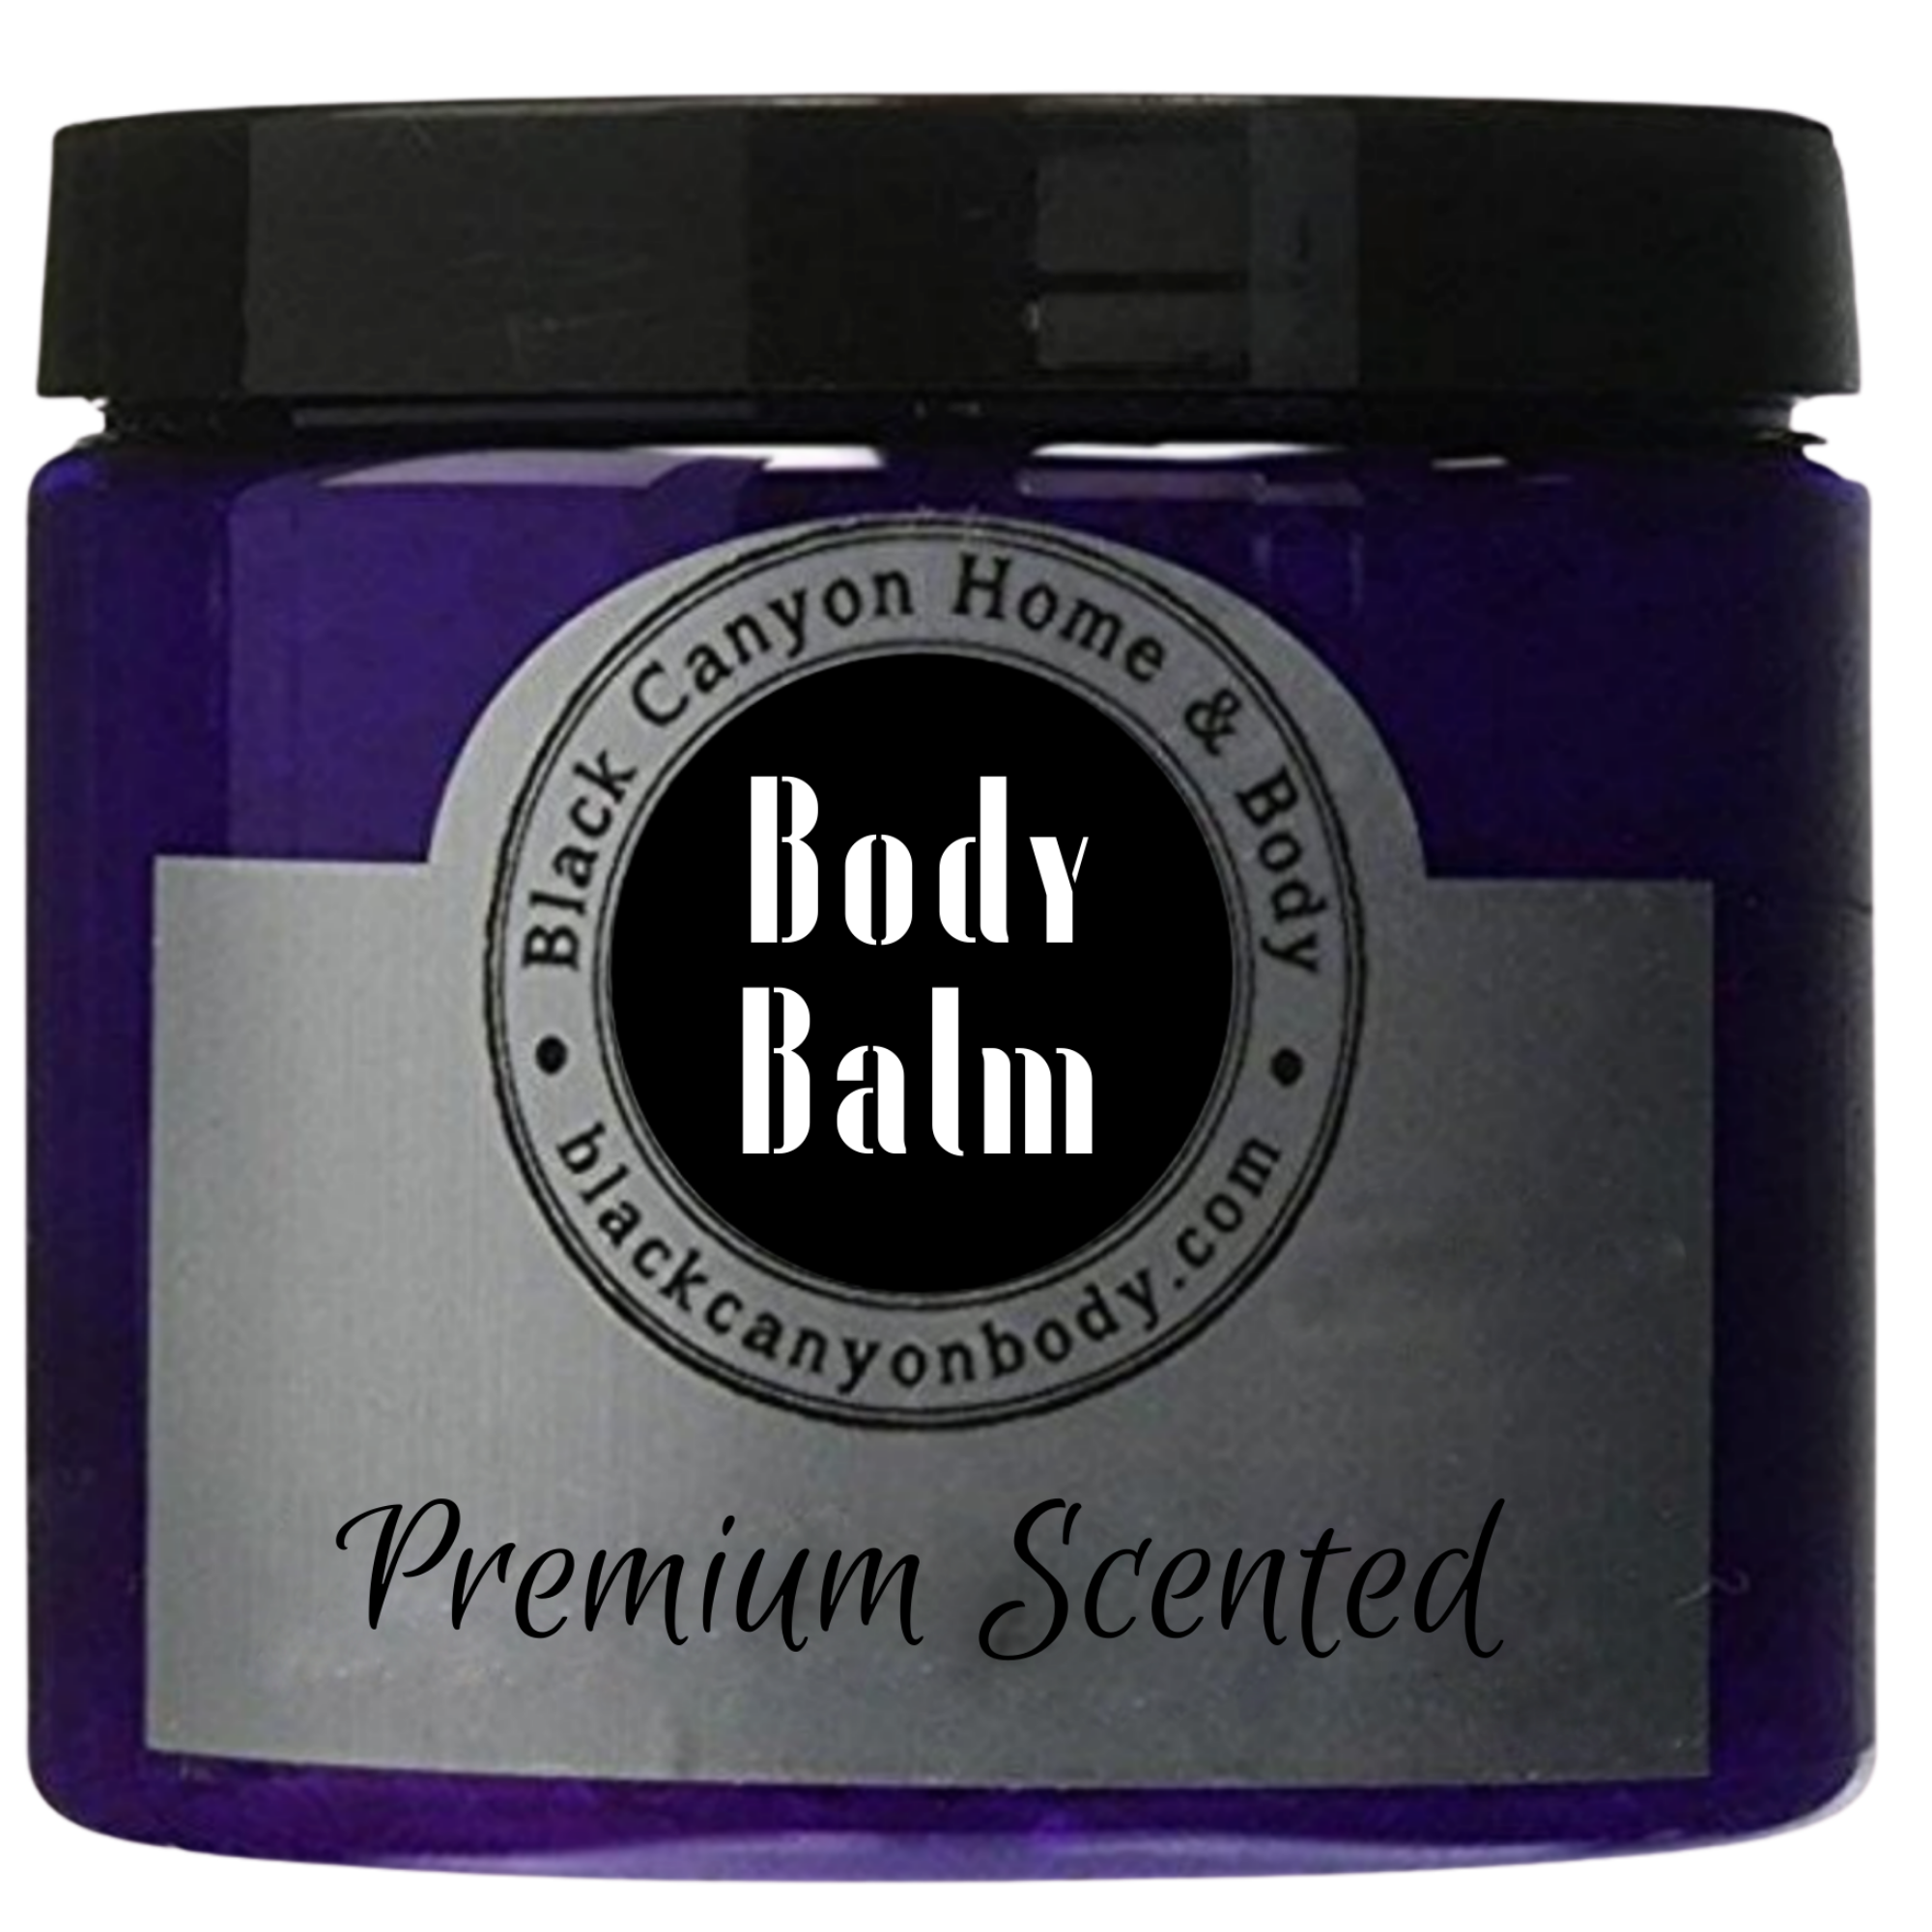 Paydens Cobalt Bay Rum & Tobacco Scented Natural Body Balm with Shea For Men